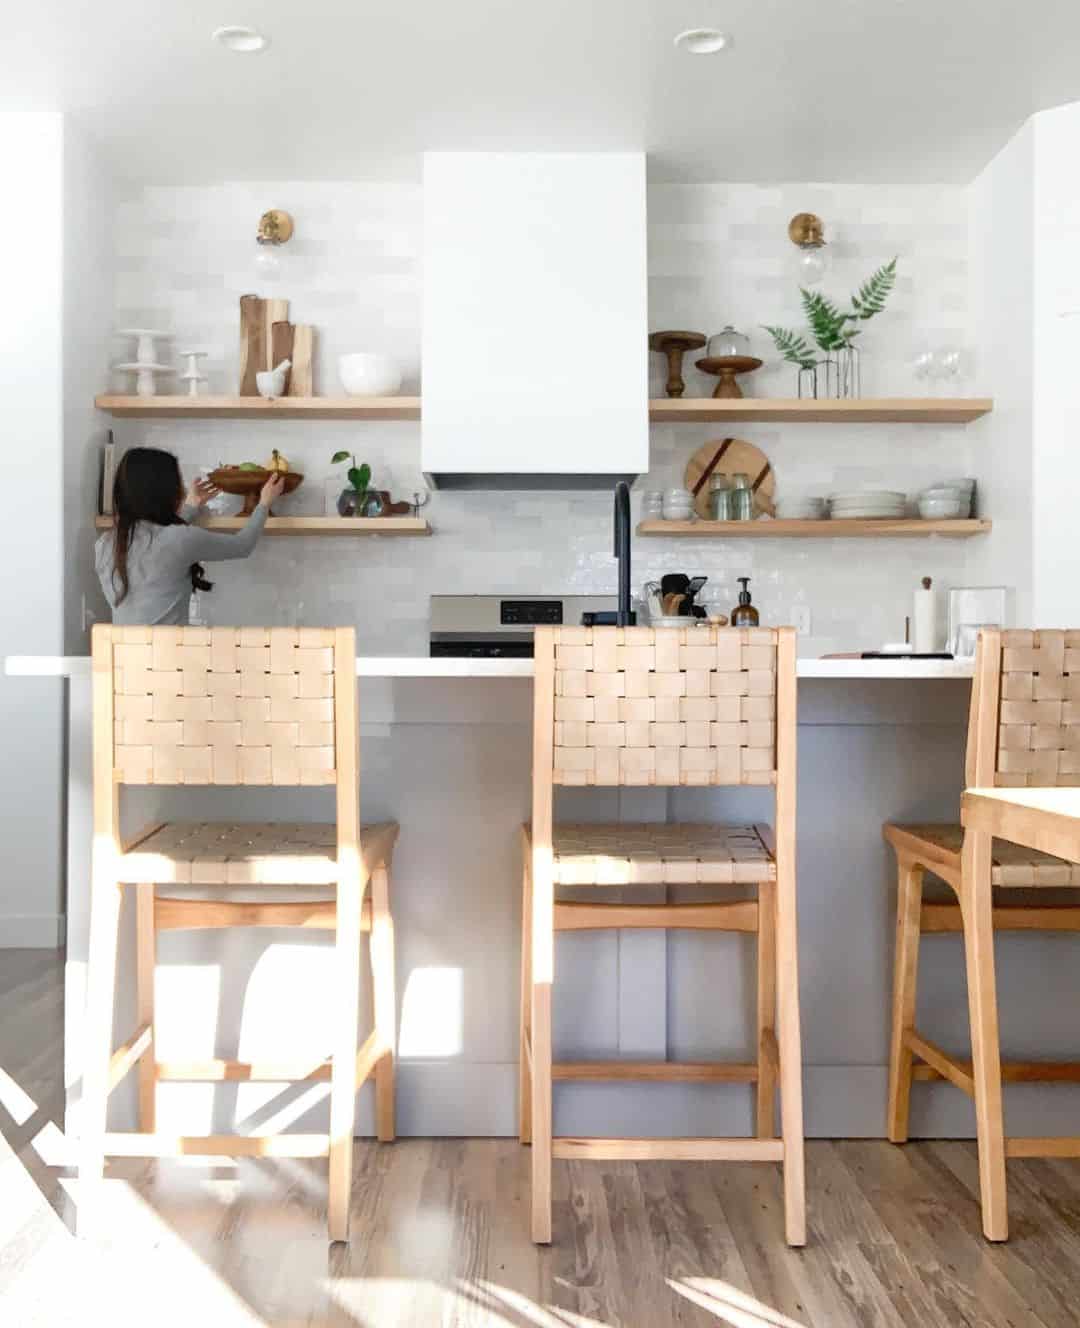 White-and-Wooden Themed Kitchen - Soul & Lane